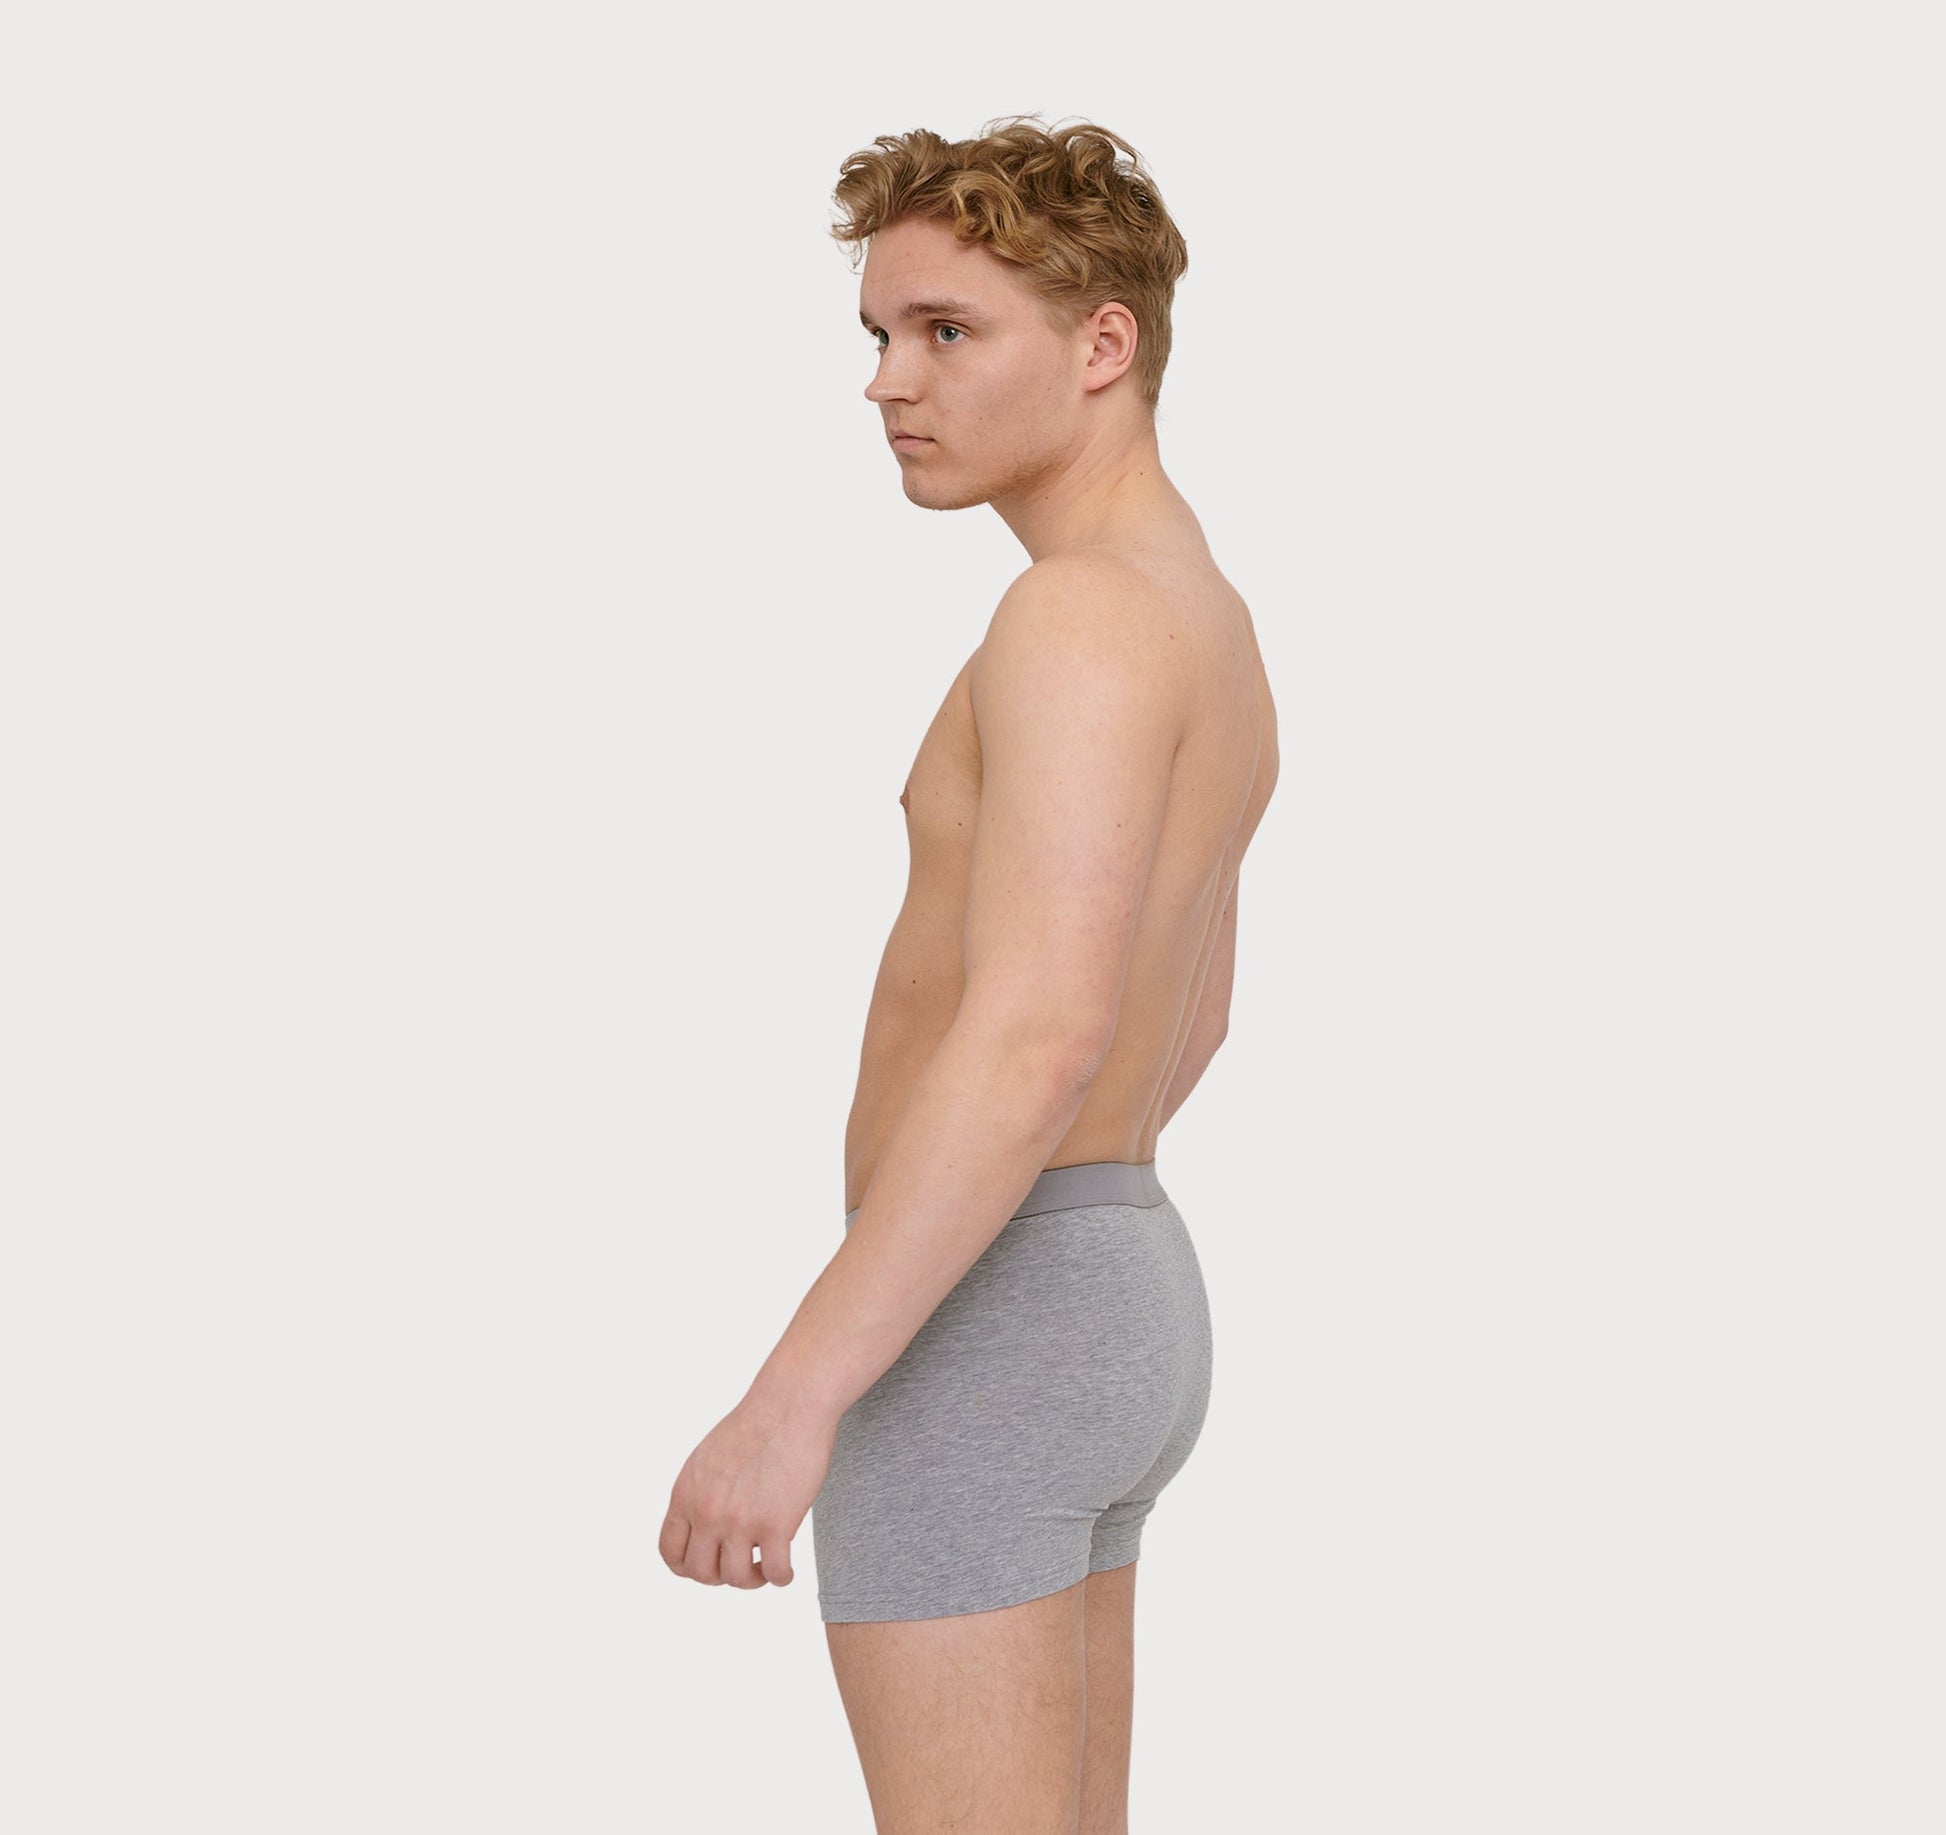 Sustainable Men's Underwear Startup Native Undies Makes Effort to Bring  Fashion Manufacture Back to the United States